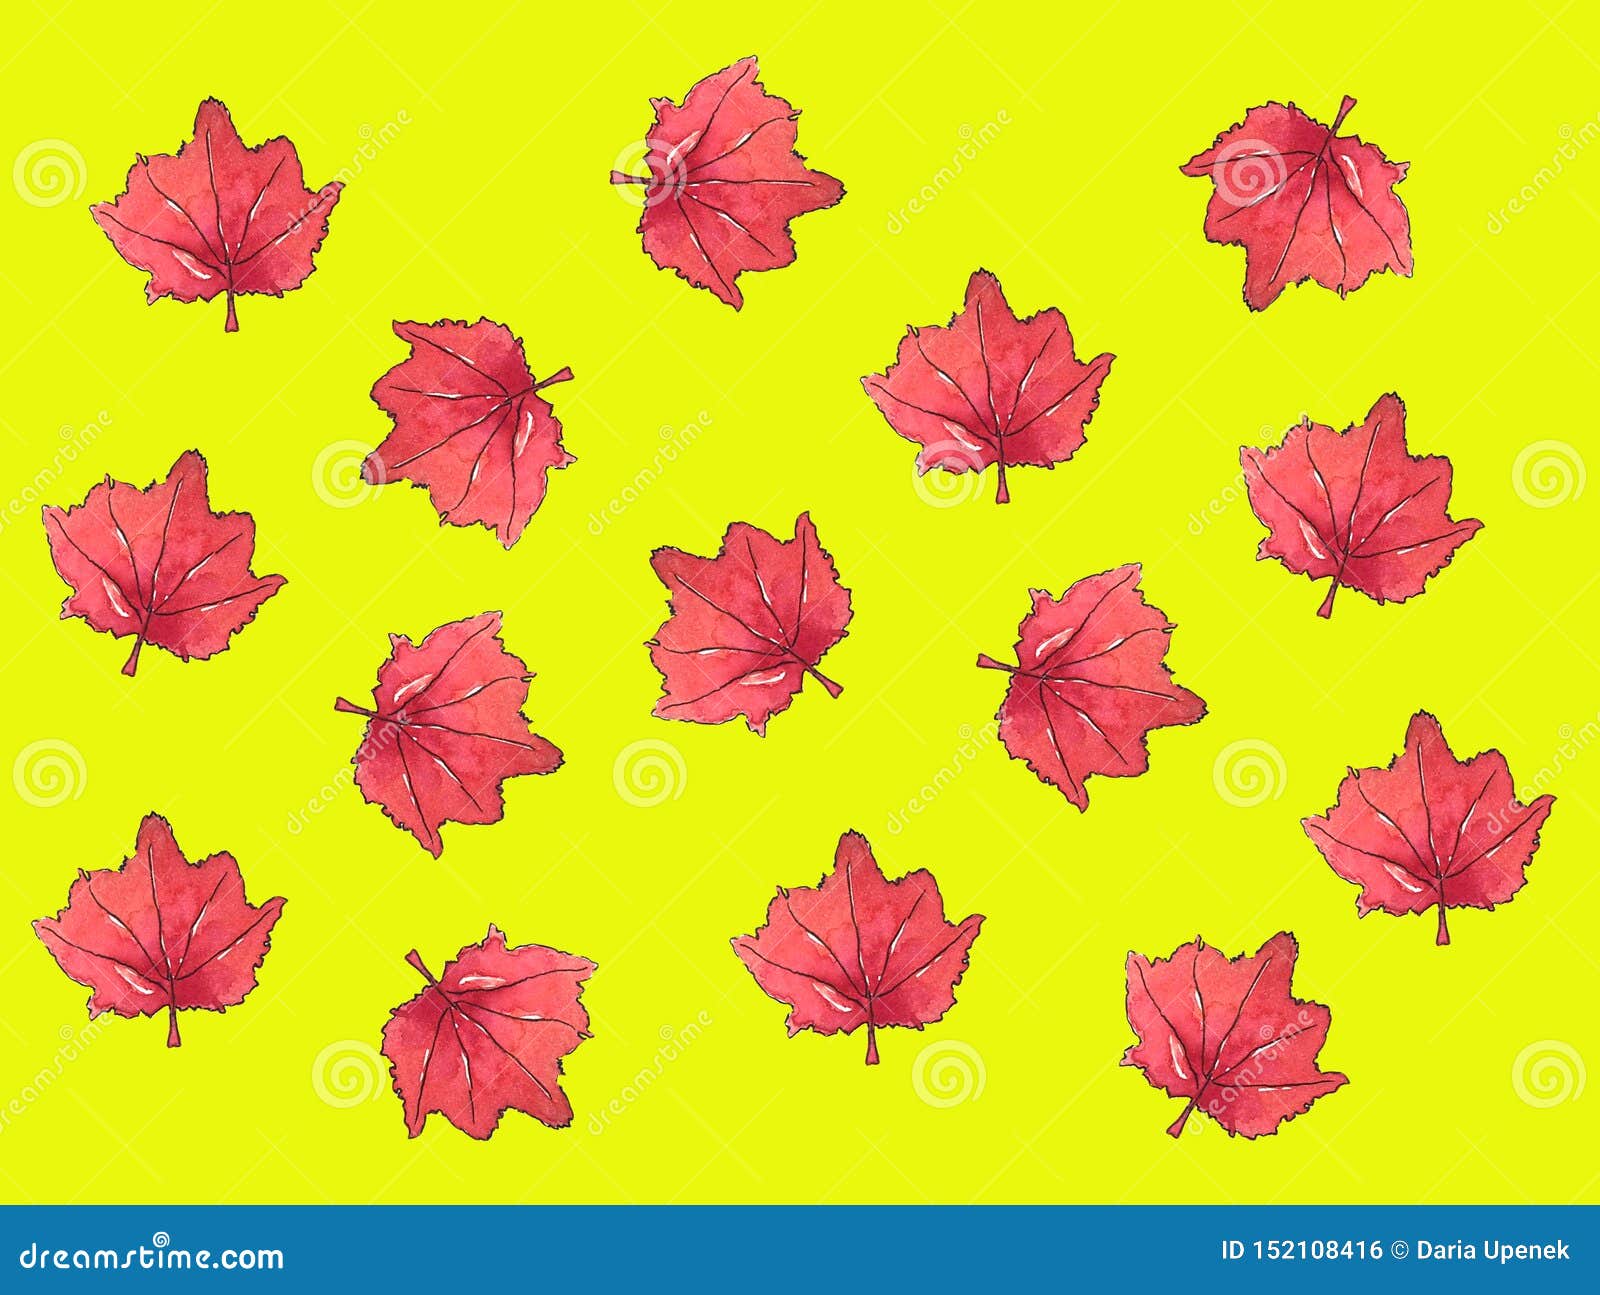 Maple Leaf Watercolor Background Maple Leaf Autumn Pattern Stock ...